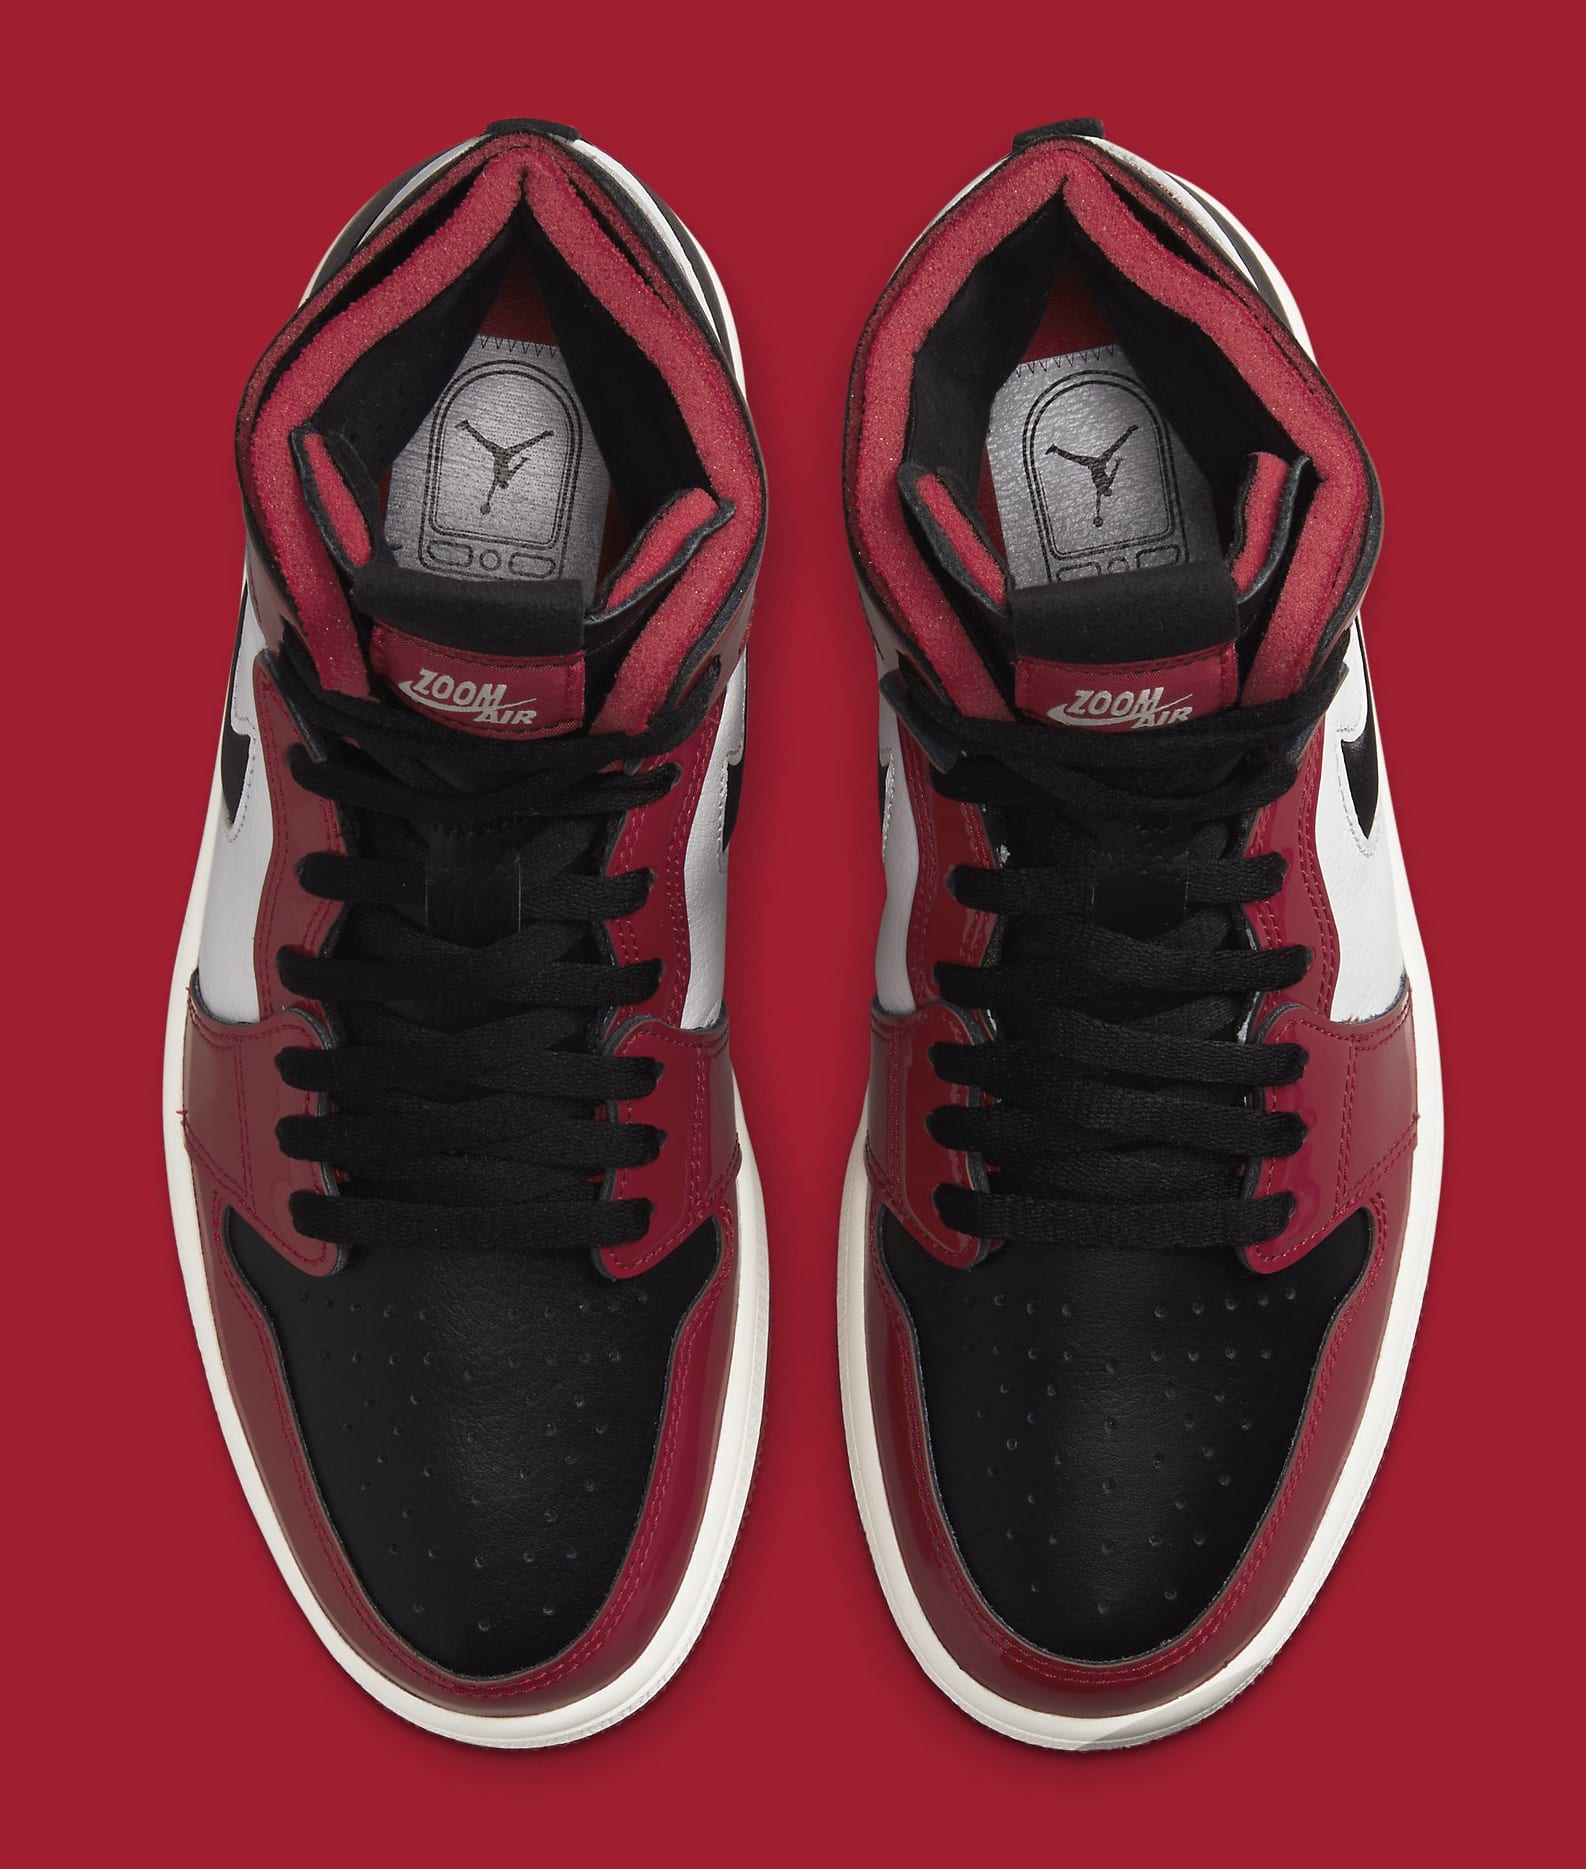 Chicago Bulls Colors Appear on This Air Jordan 1 Zoom CMFT | Complex